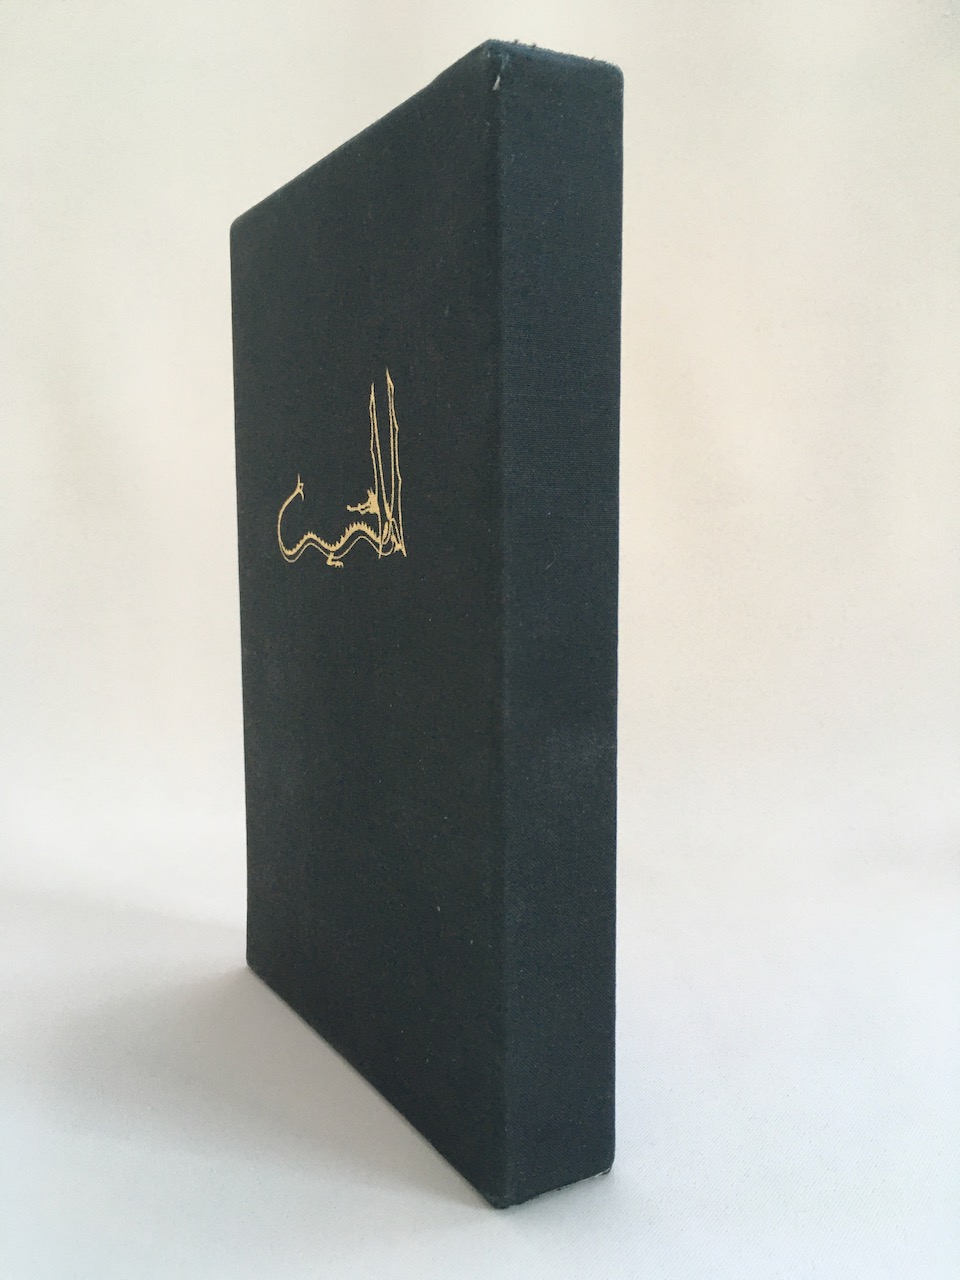 
 The Hobbit by J.R.R. Tolkien, 1999 Limited Edition, one of 2500 copies 4